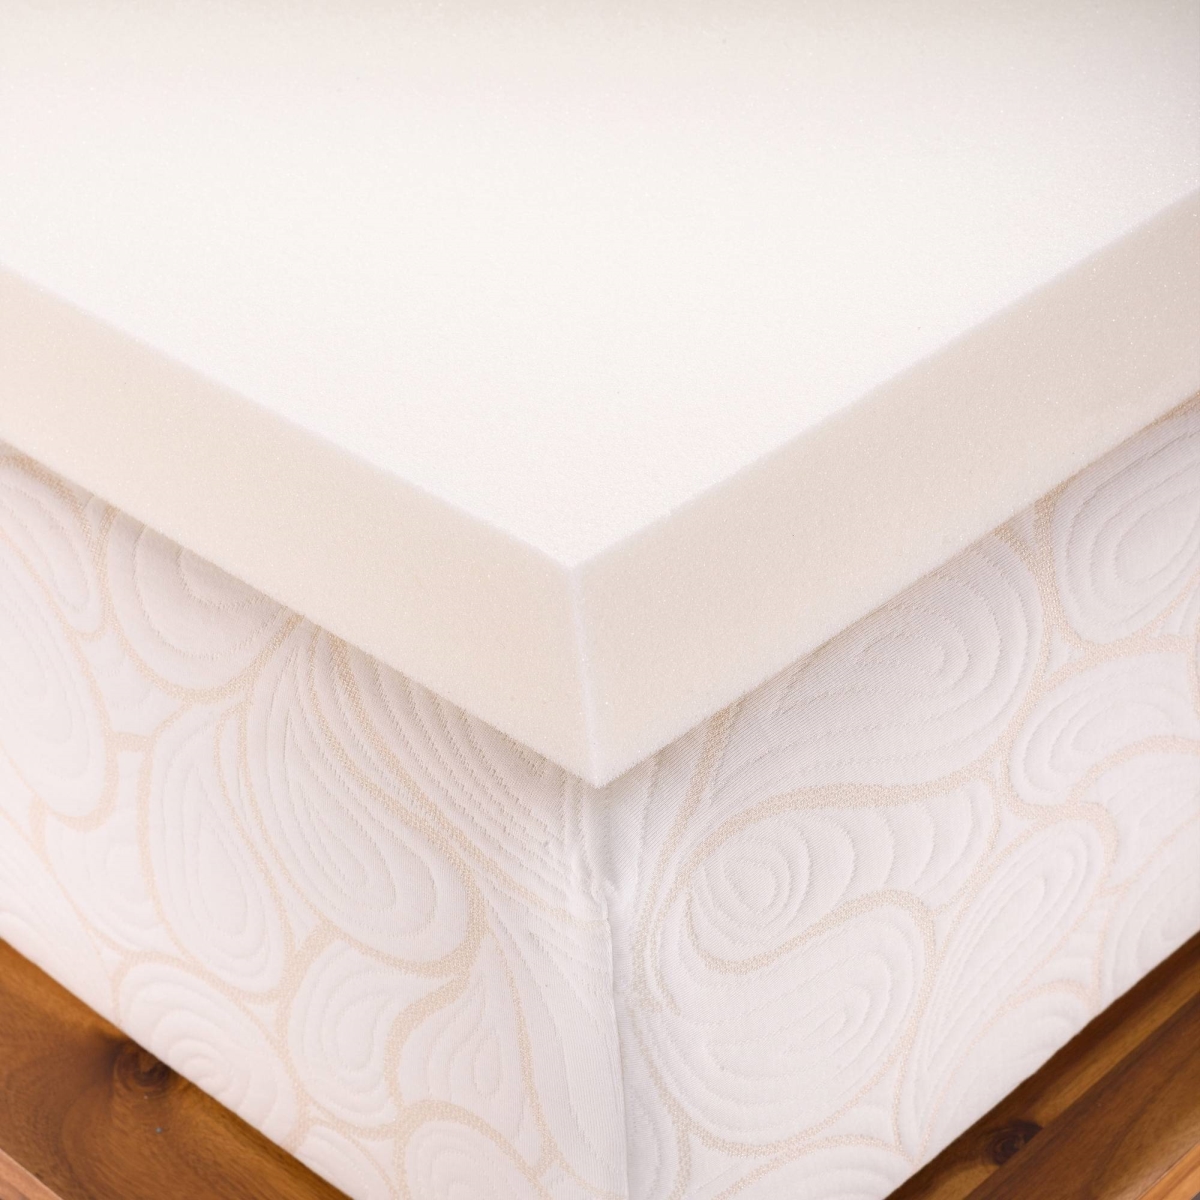 Picture of Memory Foam Solutions UBSPUMC2804 California King 4 Inch Thick  Medium Firm Conventional Polyurethane Foam Mattress Pad Bed Topper Made in the USA